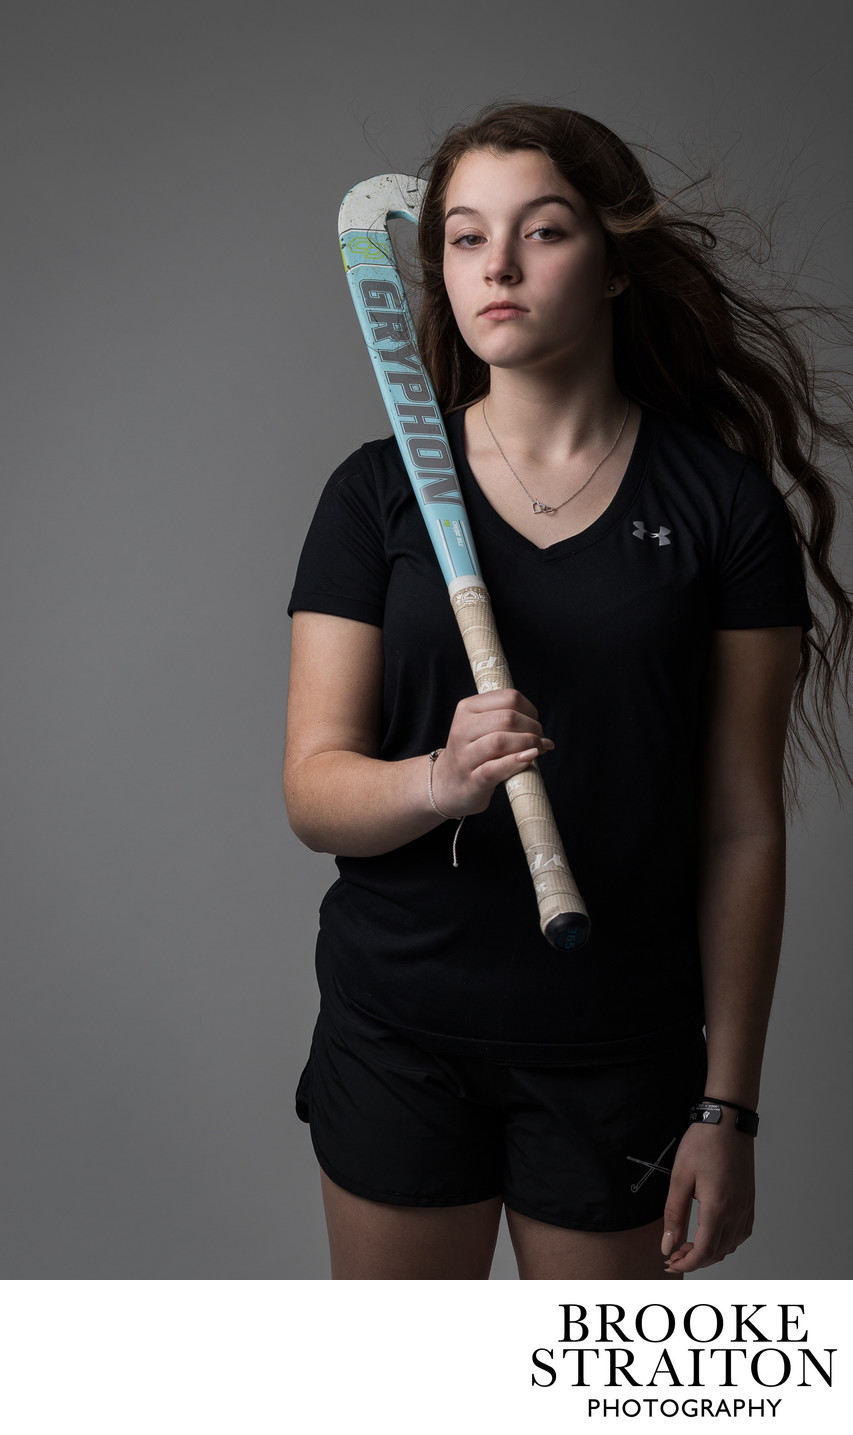 Girl with a hockey stick, lifestyle shot photography